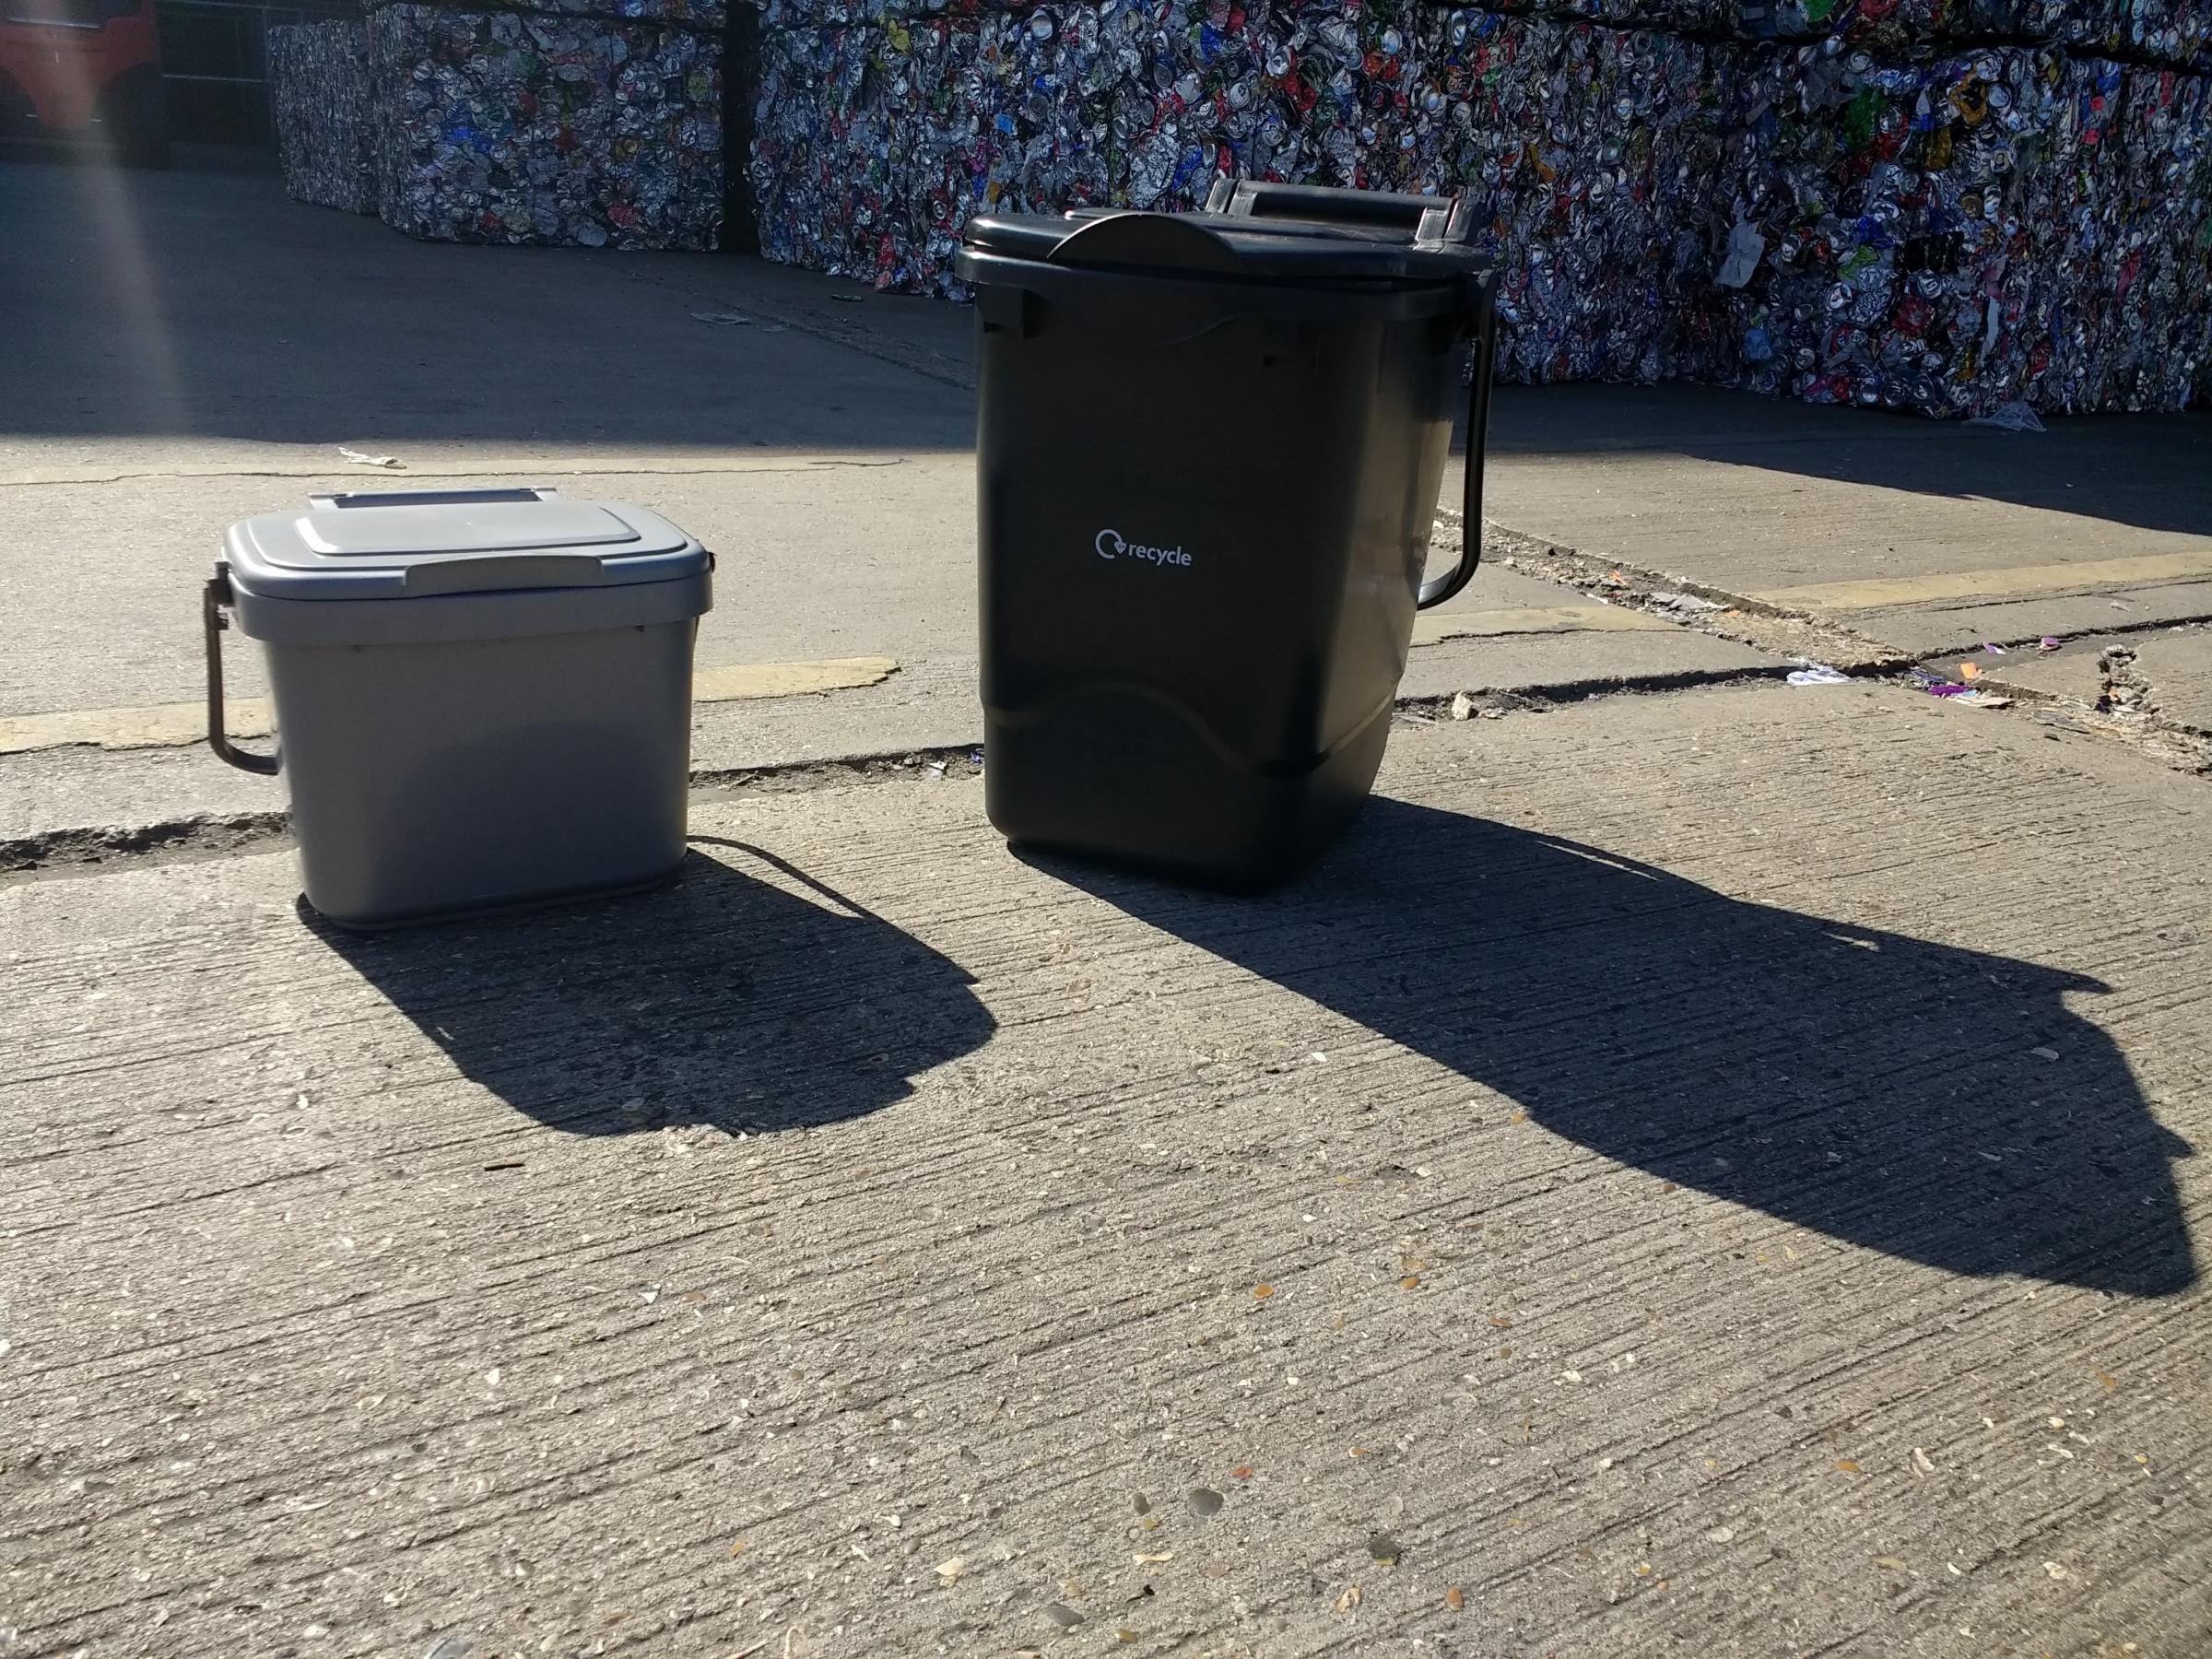 The food waste bin and caddy